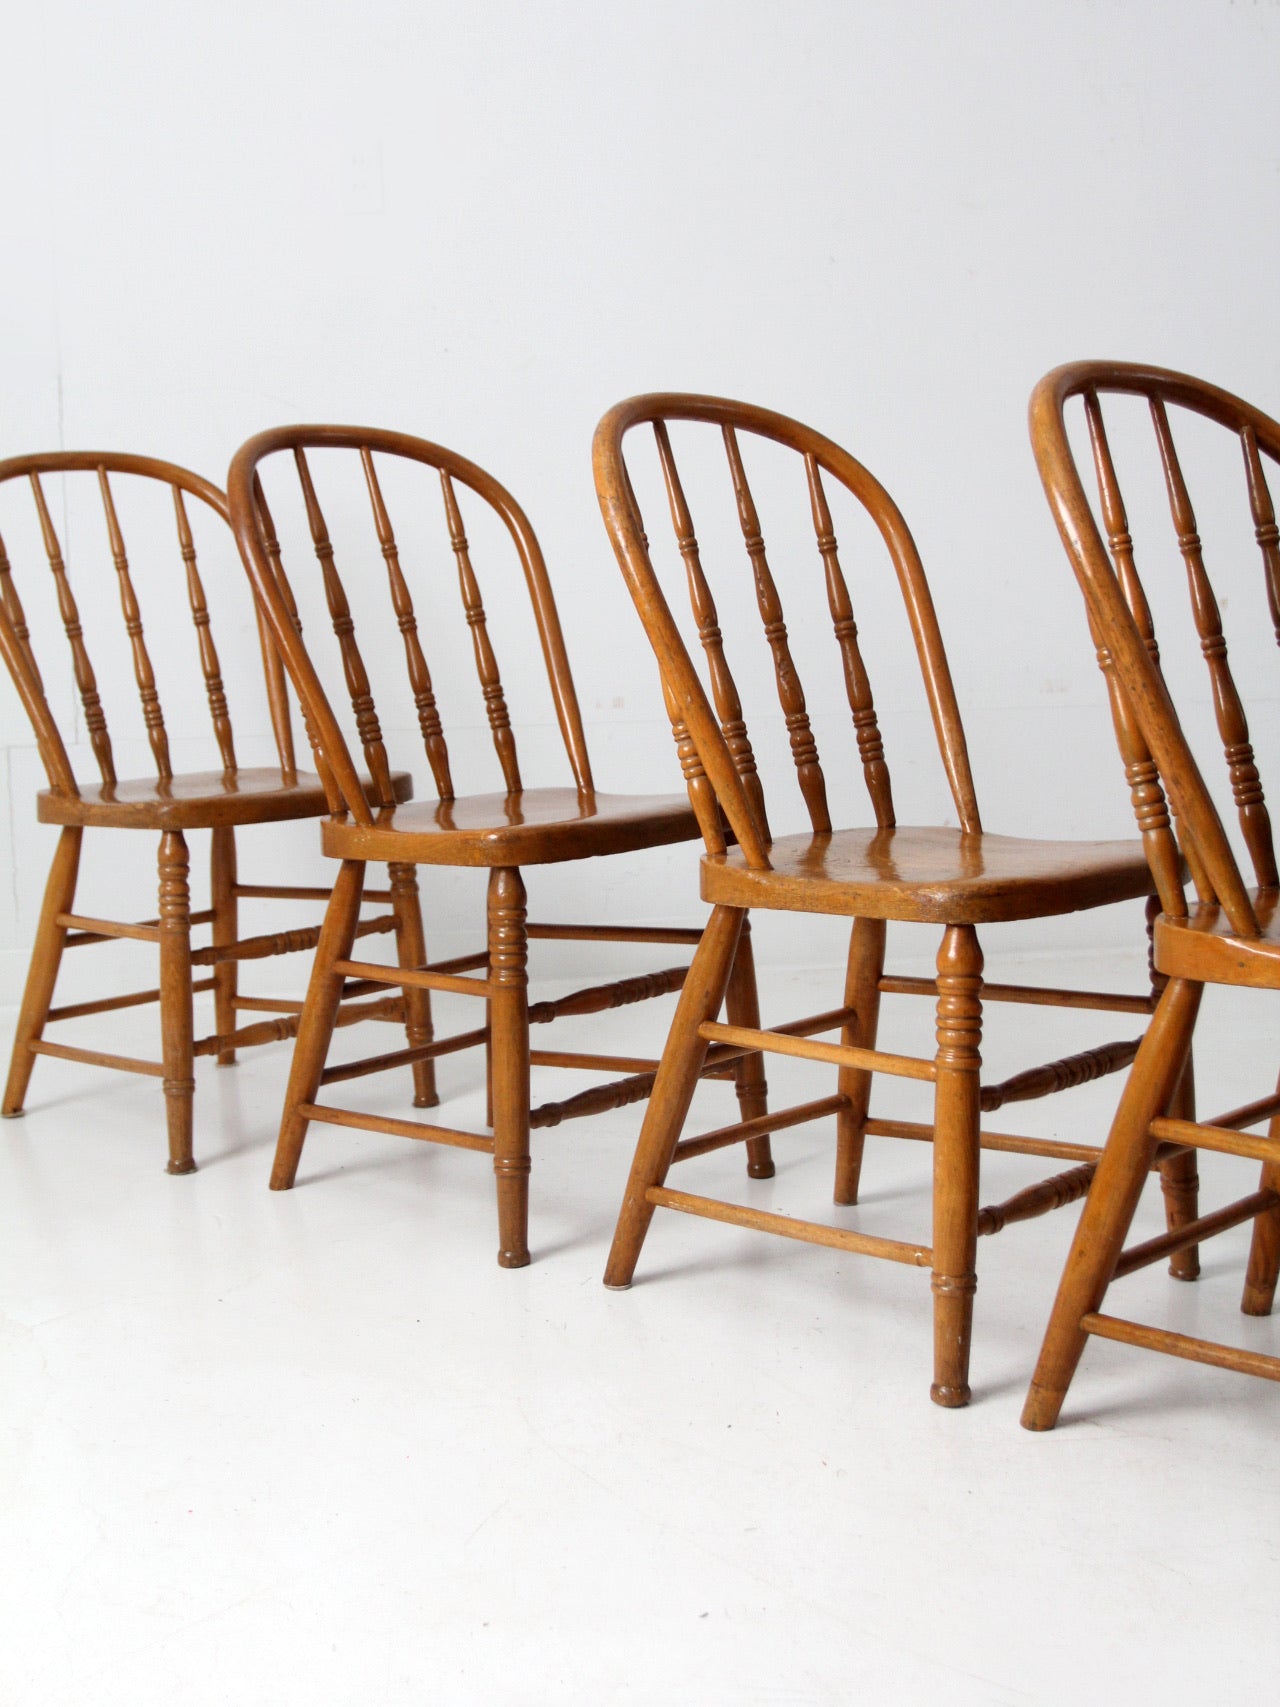 antique spindle back dining chairs set of 5